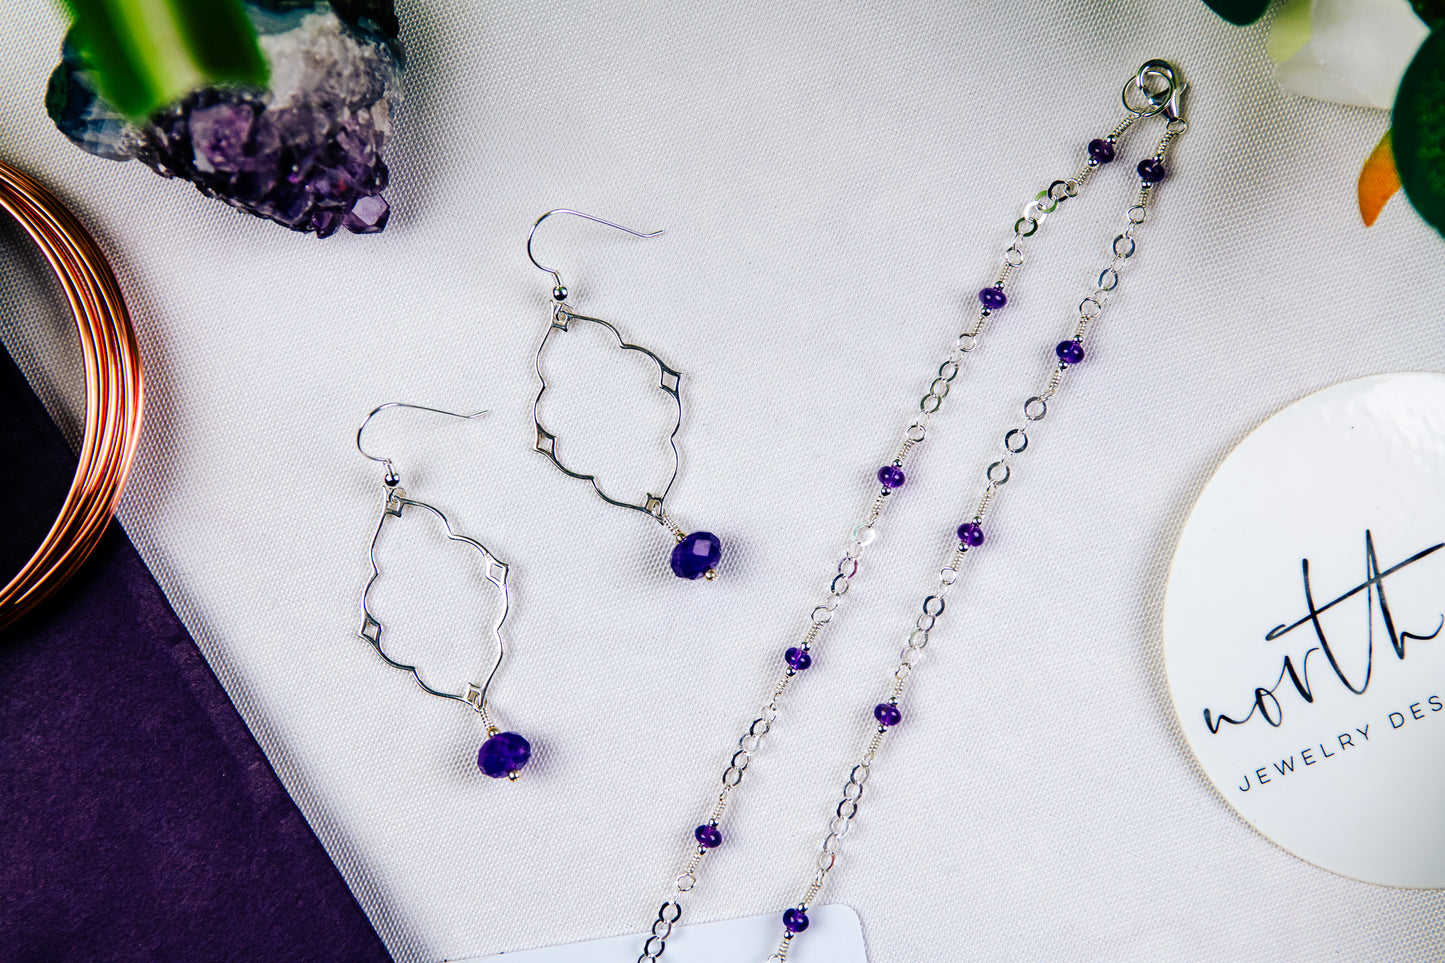 Amethyst and Sterling Silver Frame Earrings